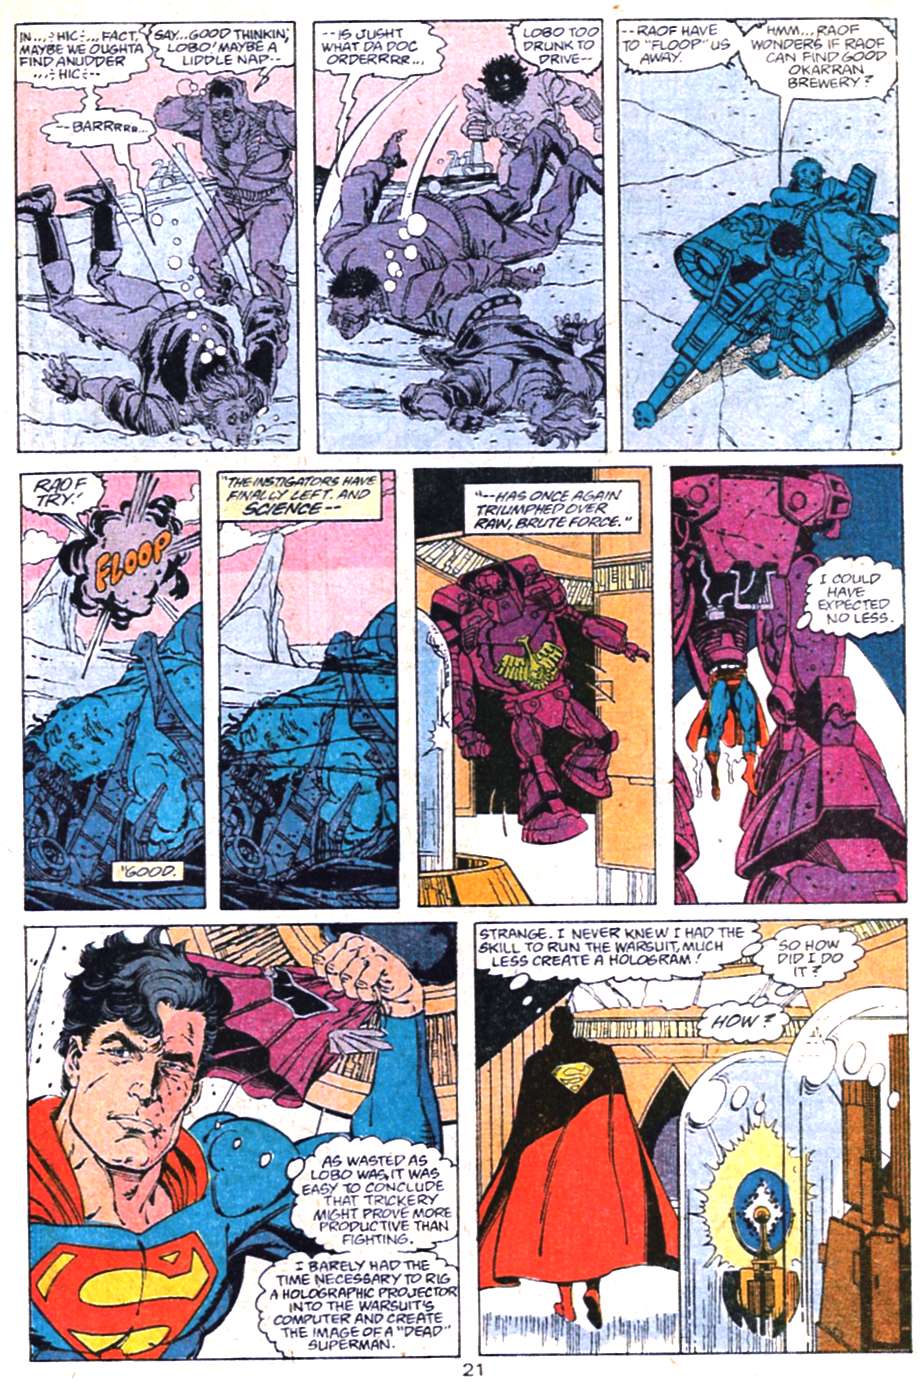 Adventures of Superman (1987) 464 Page 21